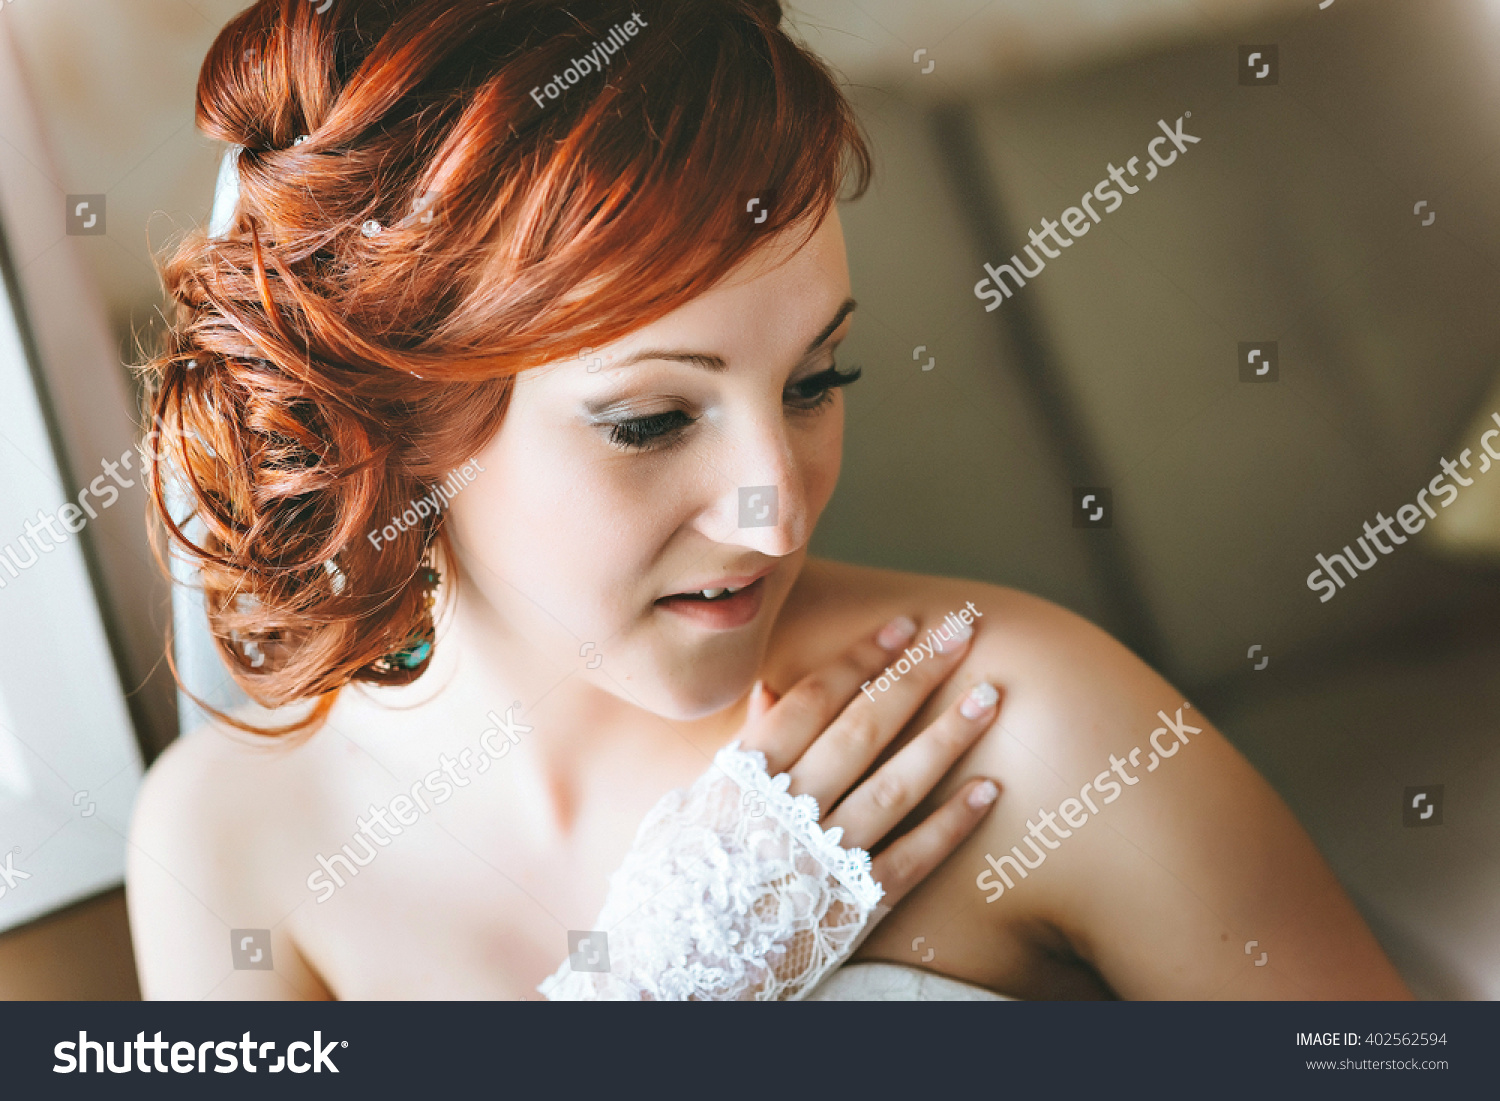 portrait of red-haired young bride, smiling, hand on shoulder. #402562594